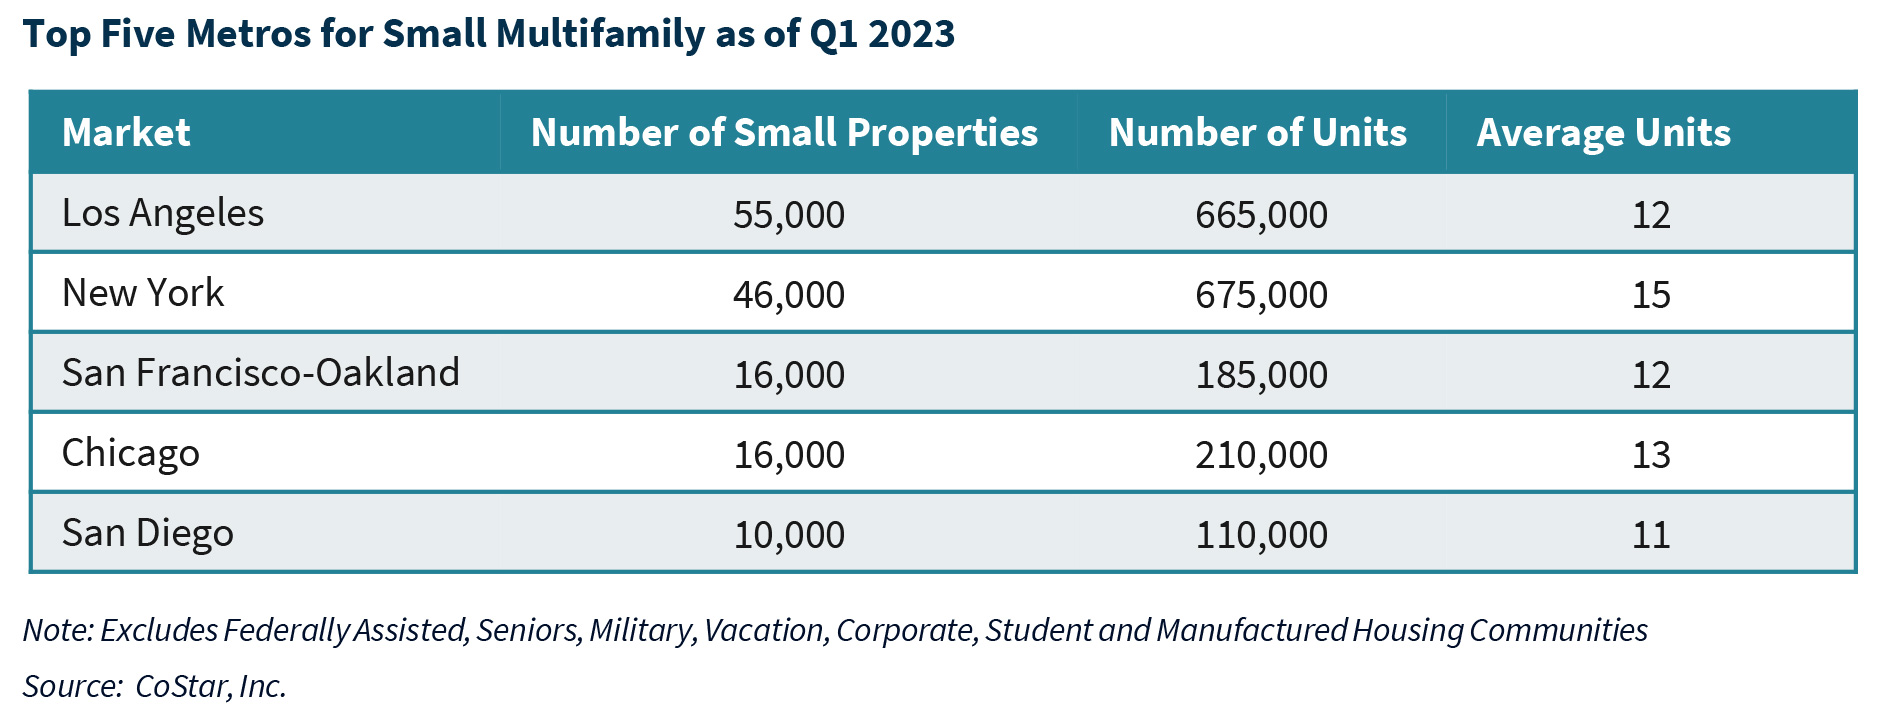 Top Five Metros for Small Multifamily as of Q1 2023